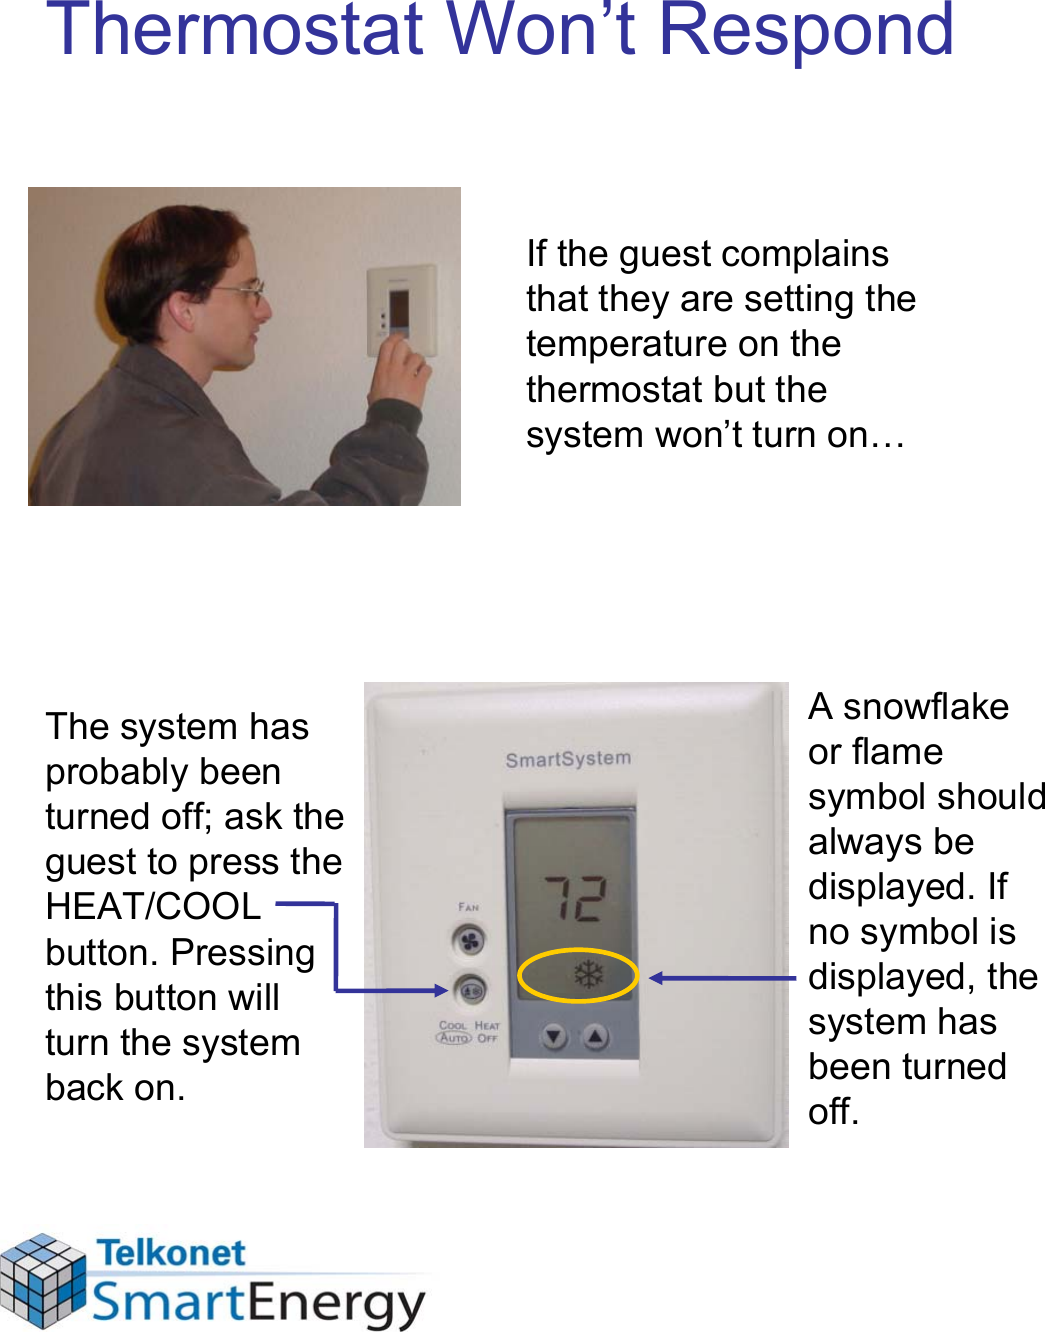 Thermostat Won’t RespondIf the guest complains that they are setting the temperature on the thermostat but the system won’t turn on…The system has probably been turned off; ask the guest to press the HEAT/COOL button. Pressing this button will turn the system back on.A snowflake or flame symbol should always be displayed. If no symbol is displayed, the system has been turned off.